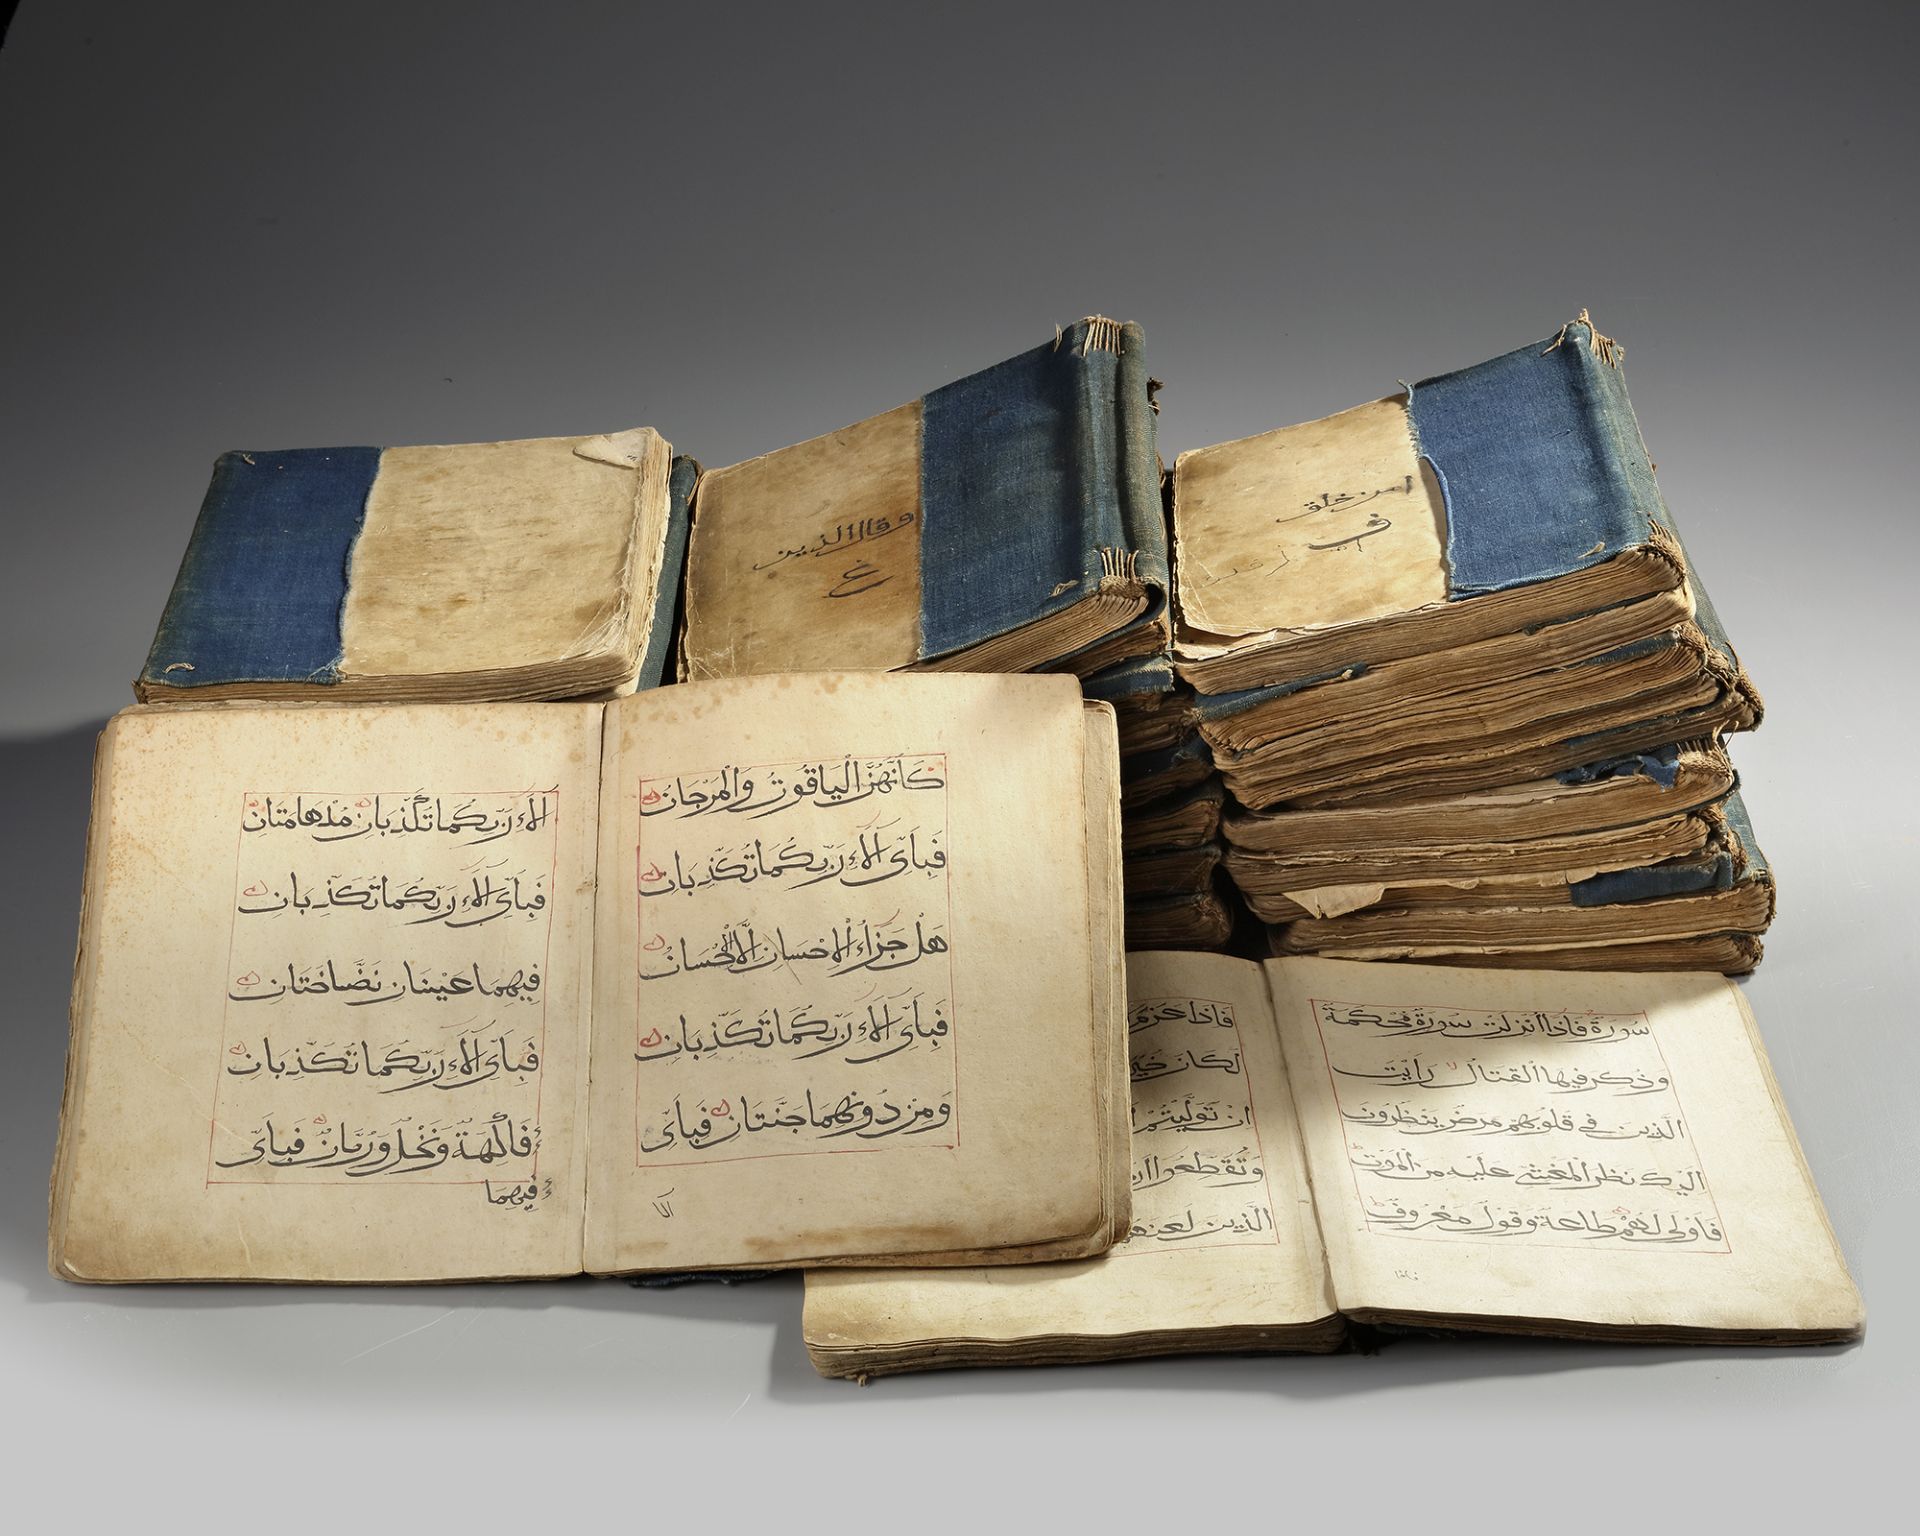 A COMPLETE QURAN IN 30 VOLUMES, CHINA, YUNNAN, 17TH CENTURY - Image 3 of 5